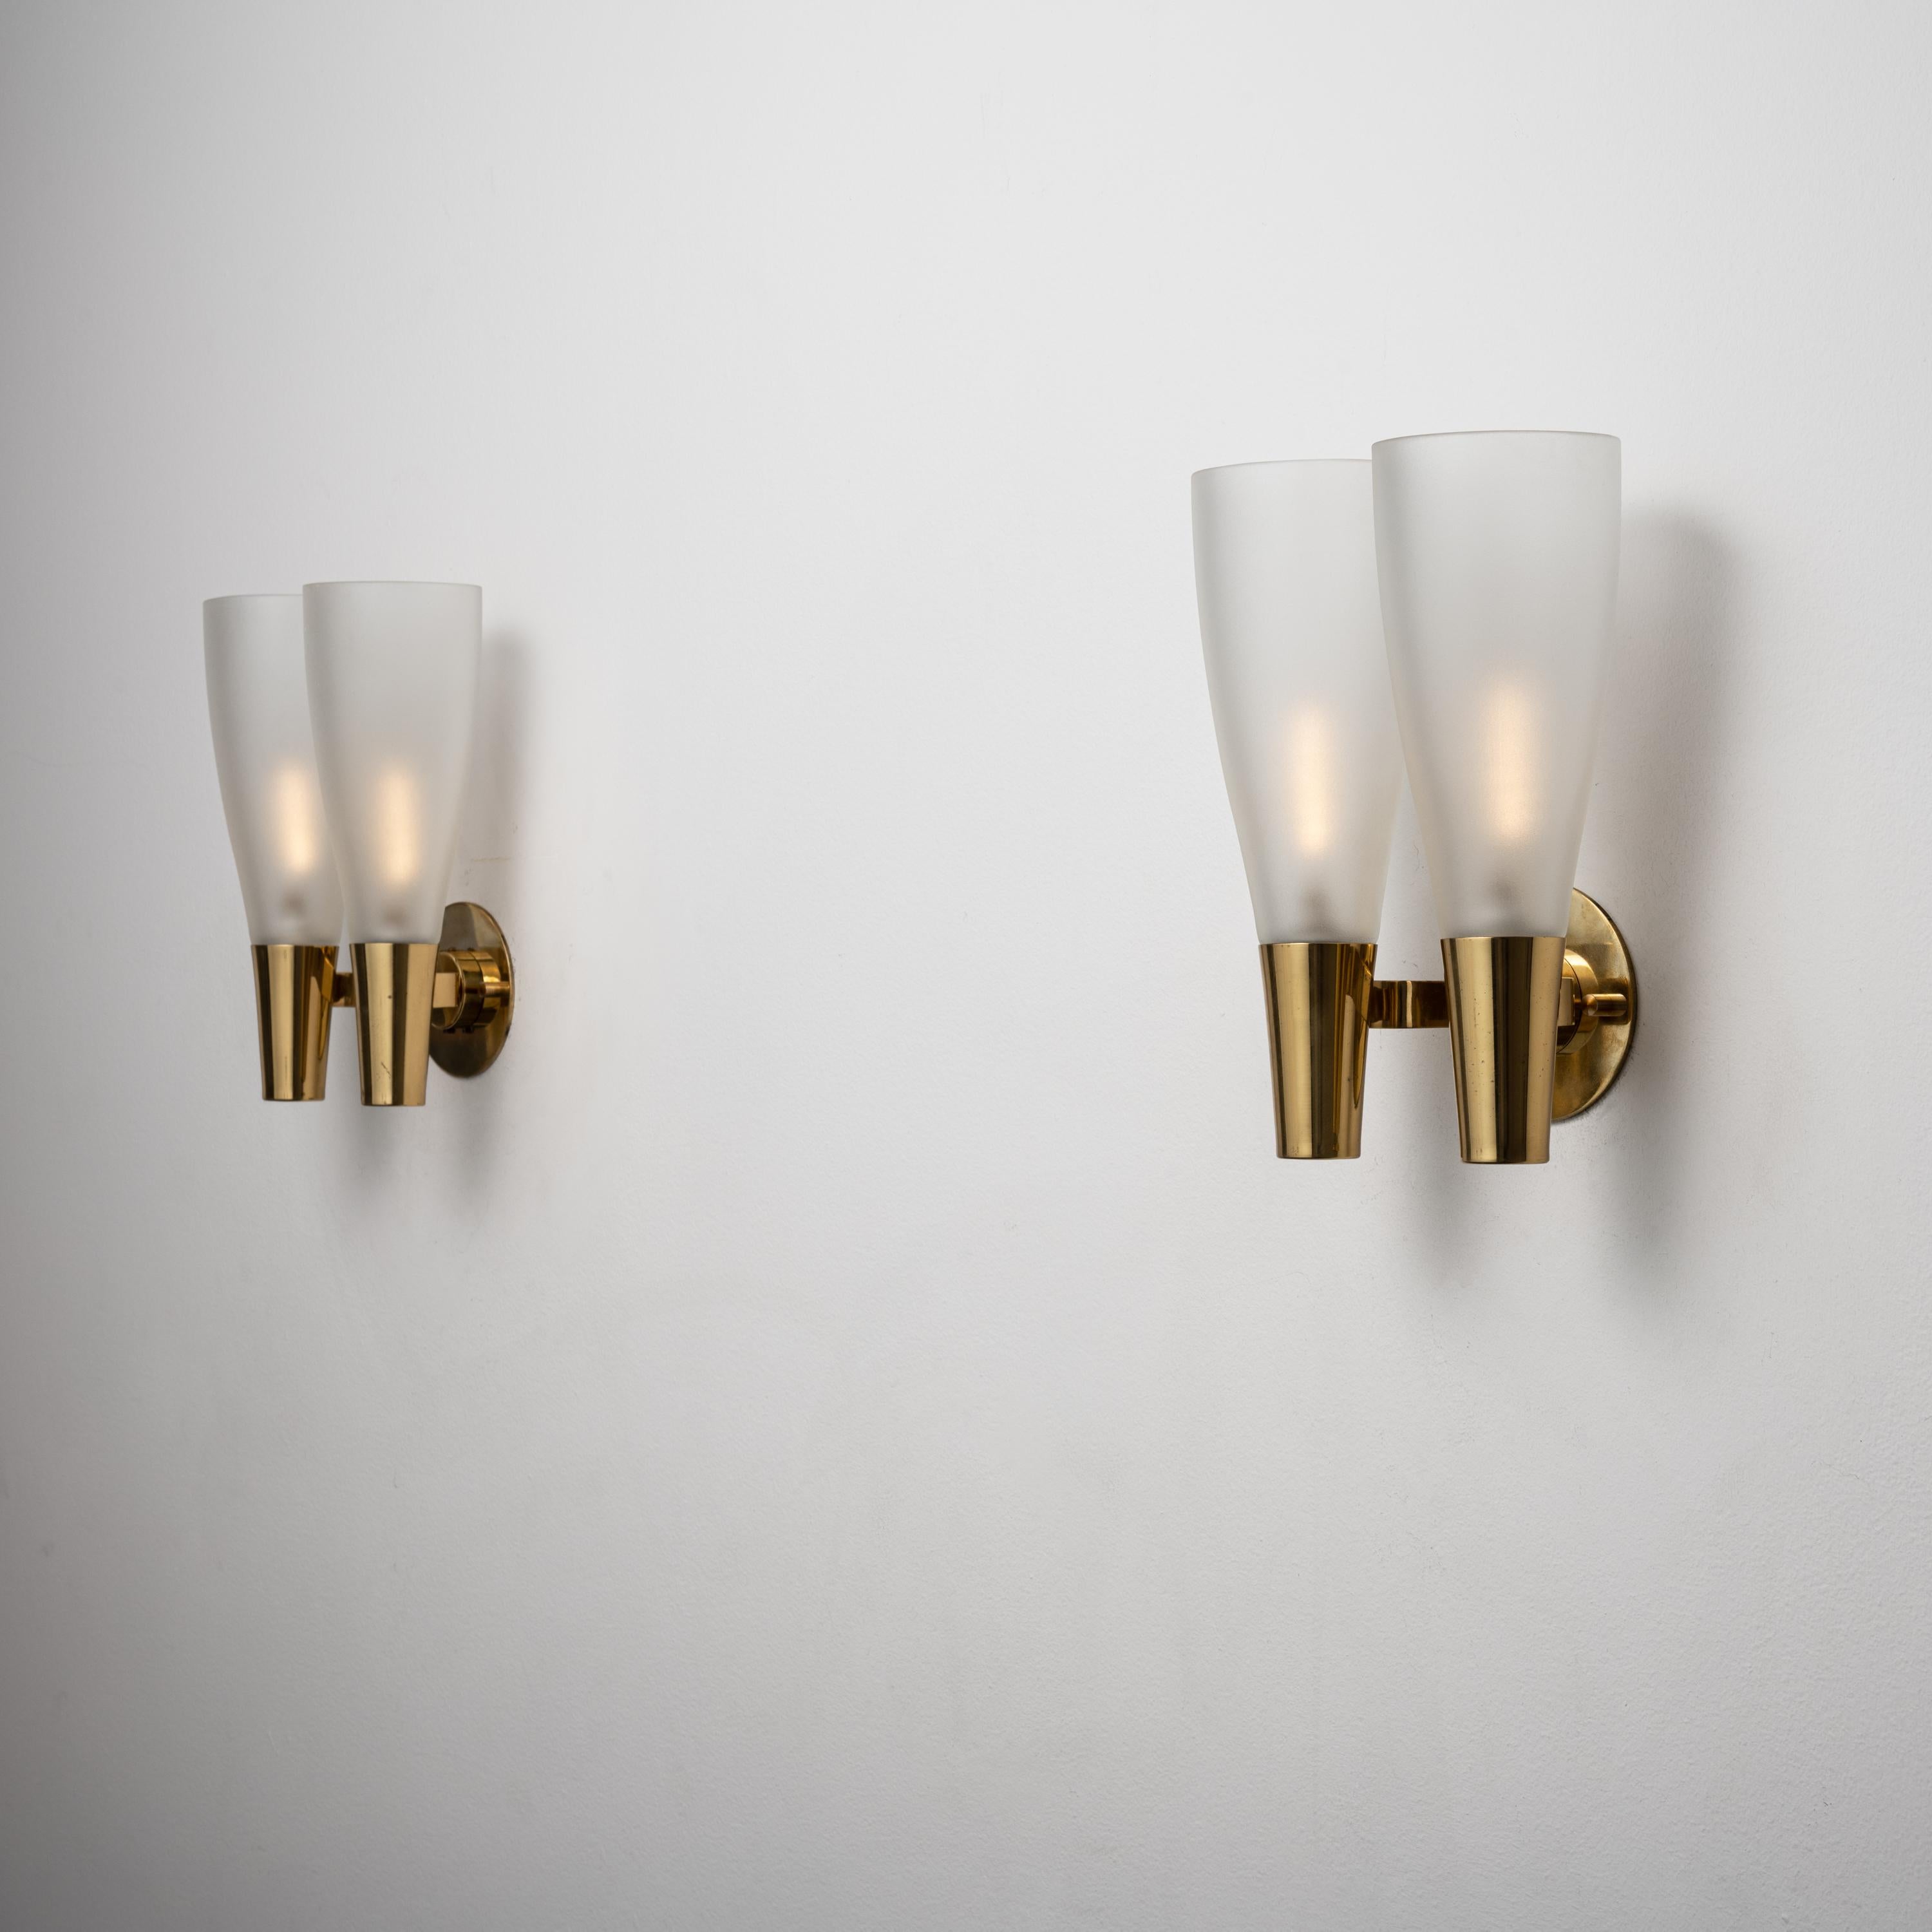 Pair of model 1537 sconces by Pietro Chiesa for Fontana Arte. Designed and manufactured in Italy, circa 1950's. Brass, glass. Rewired for U.S. standards. We recommend. Lamping: 120v 2 Qty E14 sockets with 40w frosted bulbs/ lightbulbs not included.